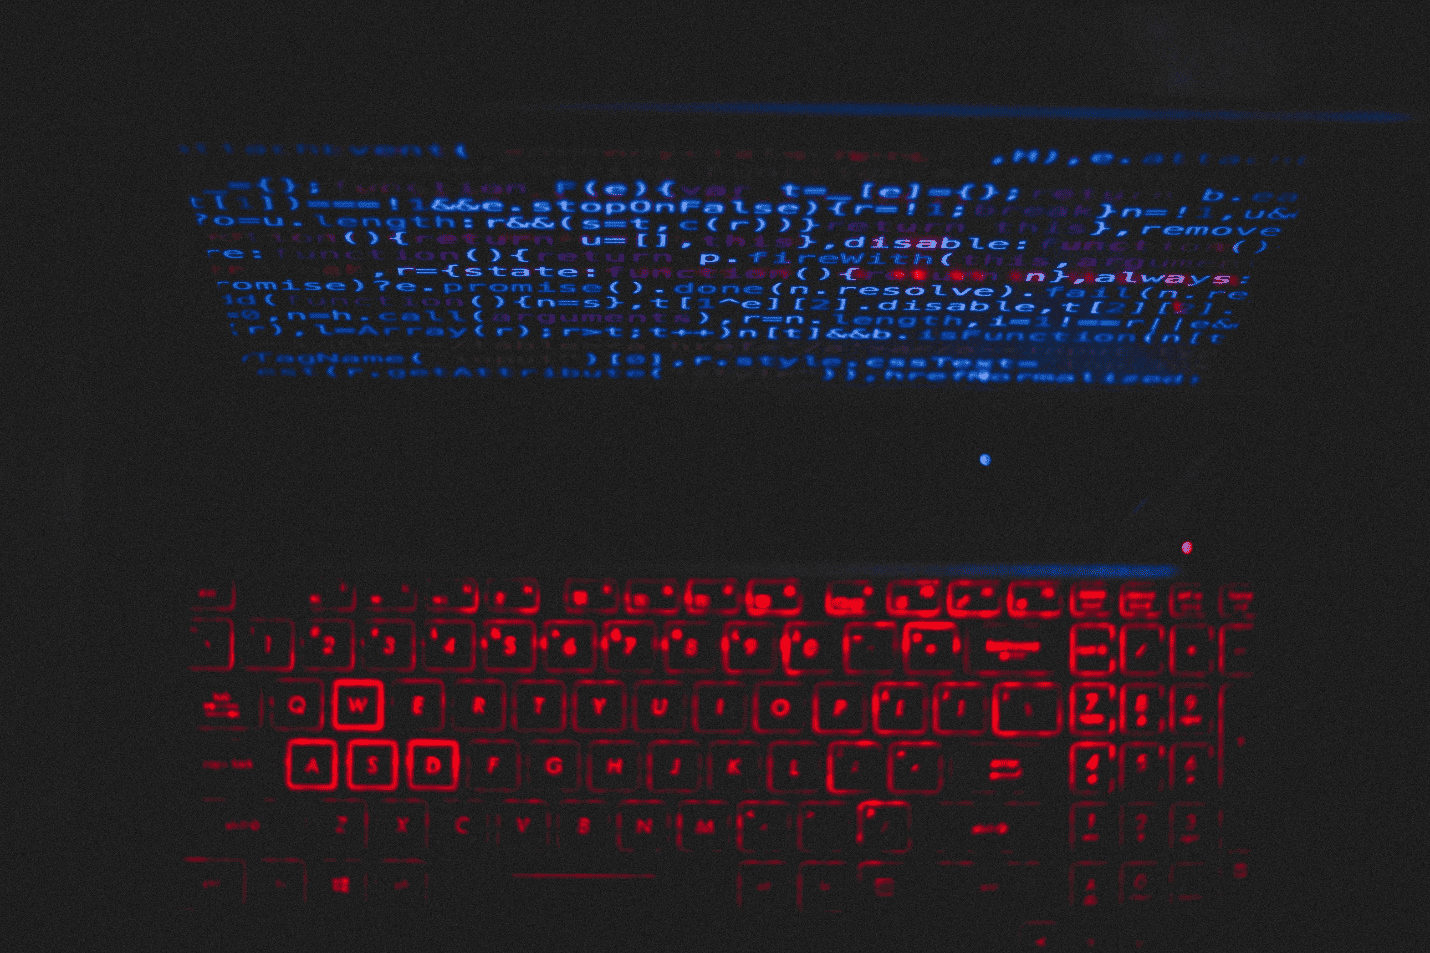 data illustrated on a laptop with a lit keyboard